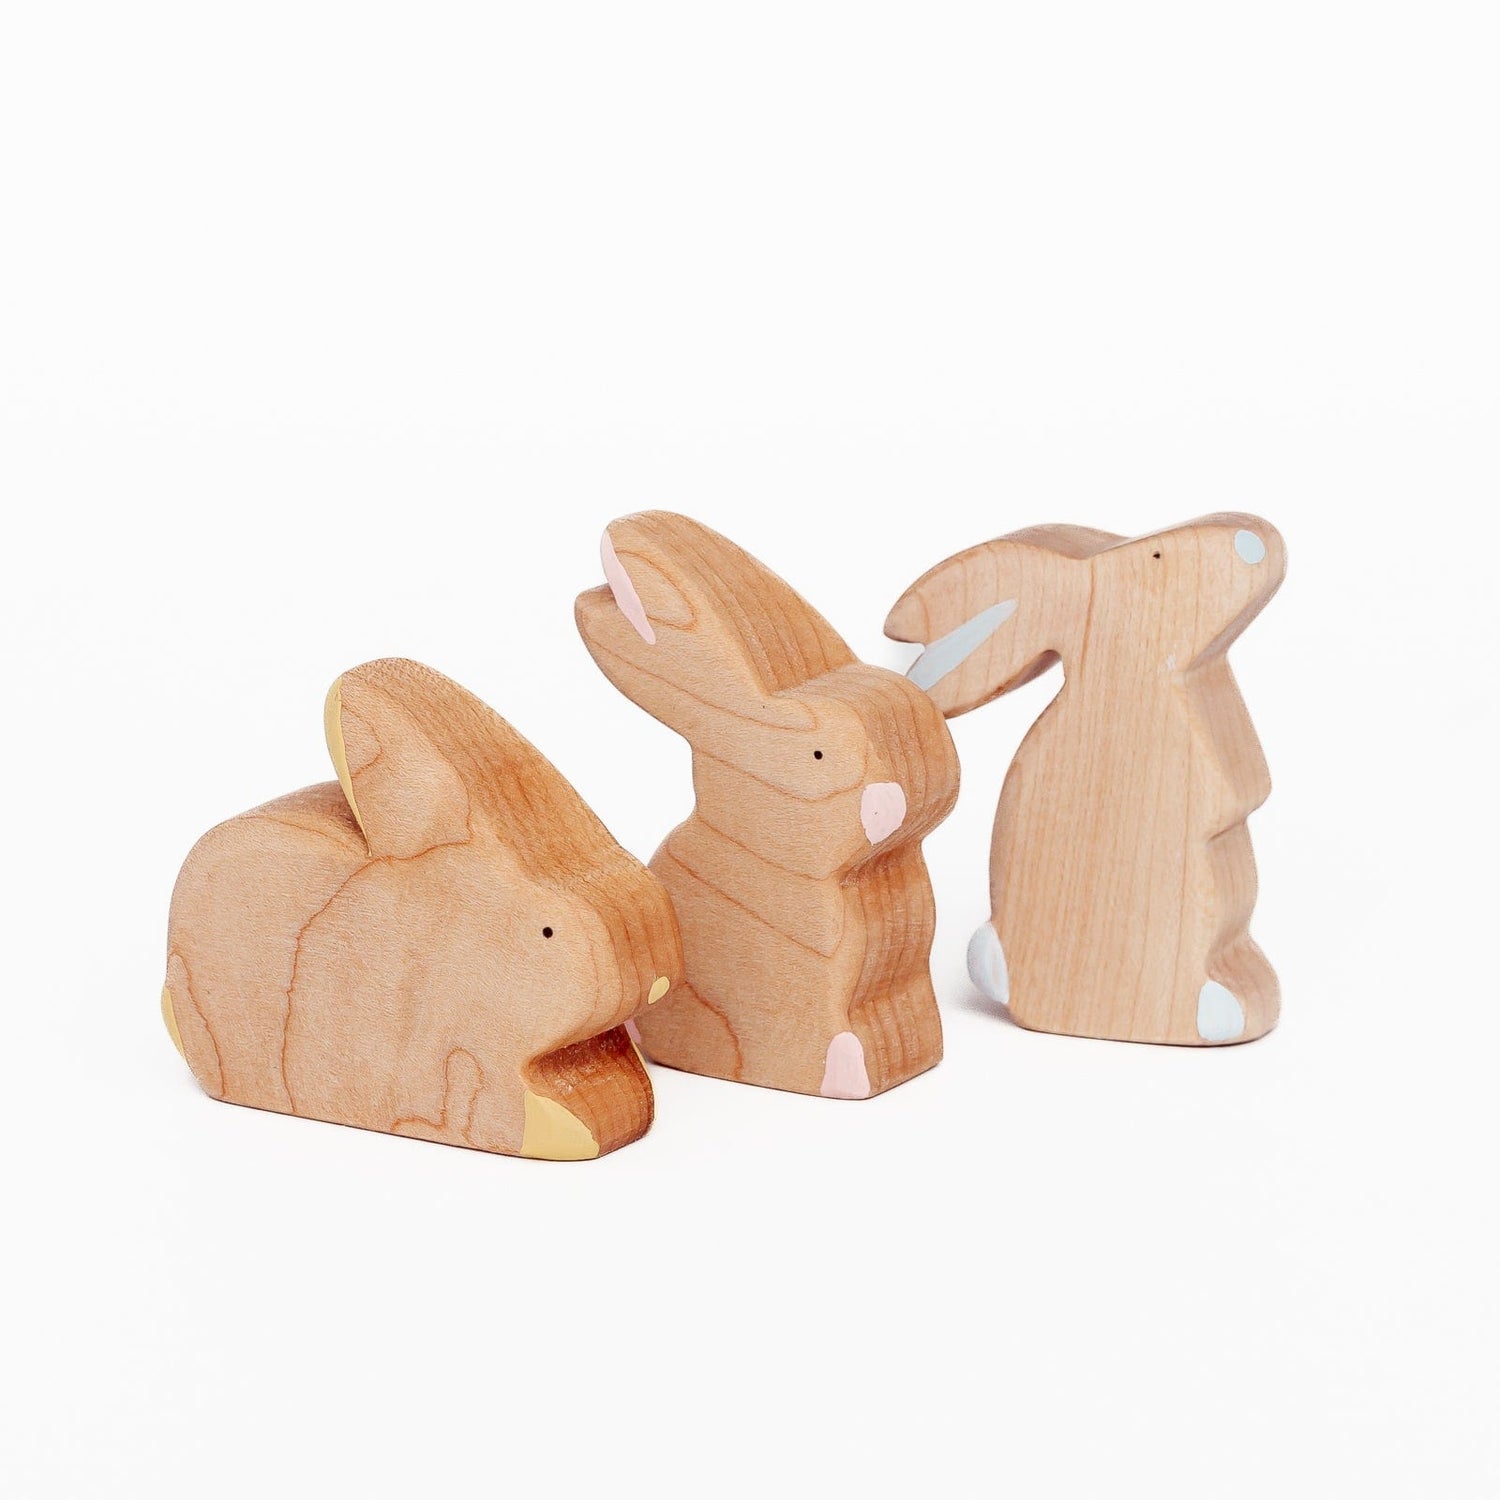 The Wooden Kind Wooden Animals Family of Bunnies (Handmade in Canada)